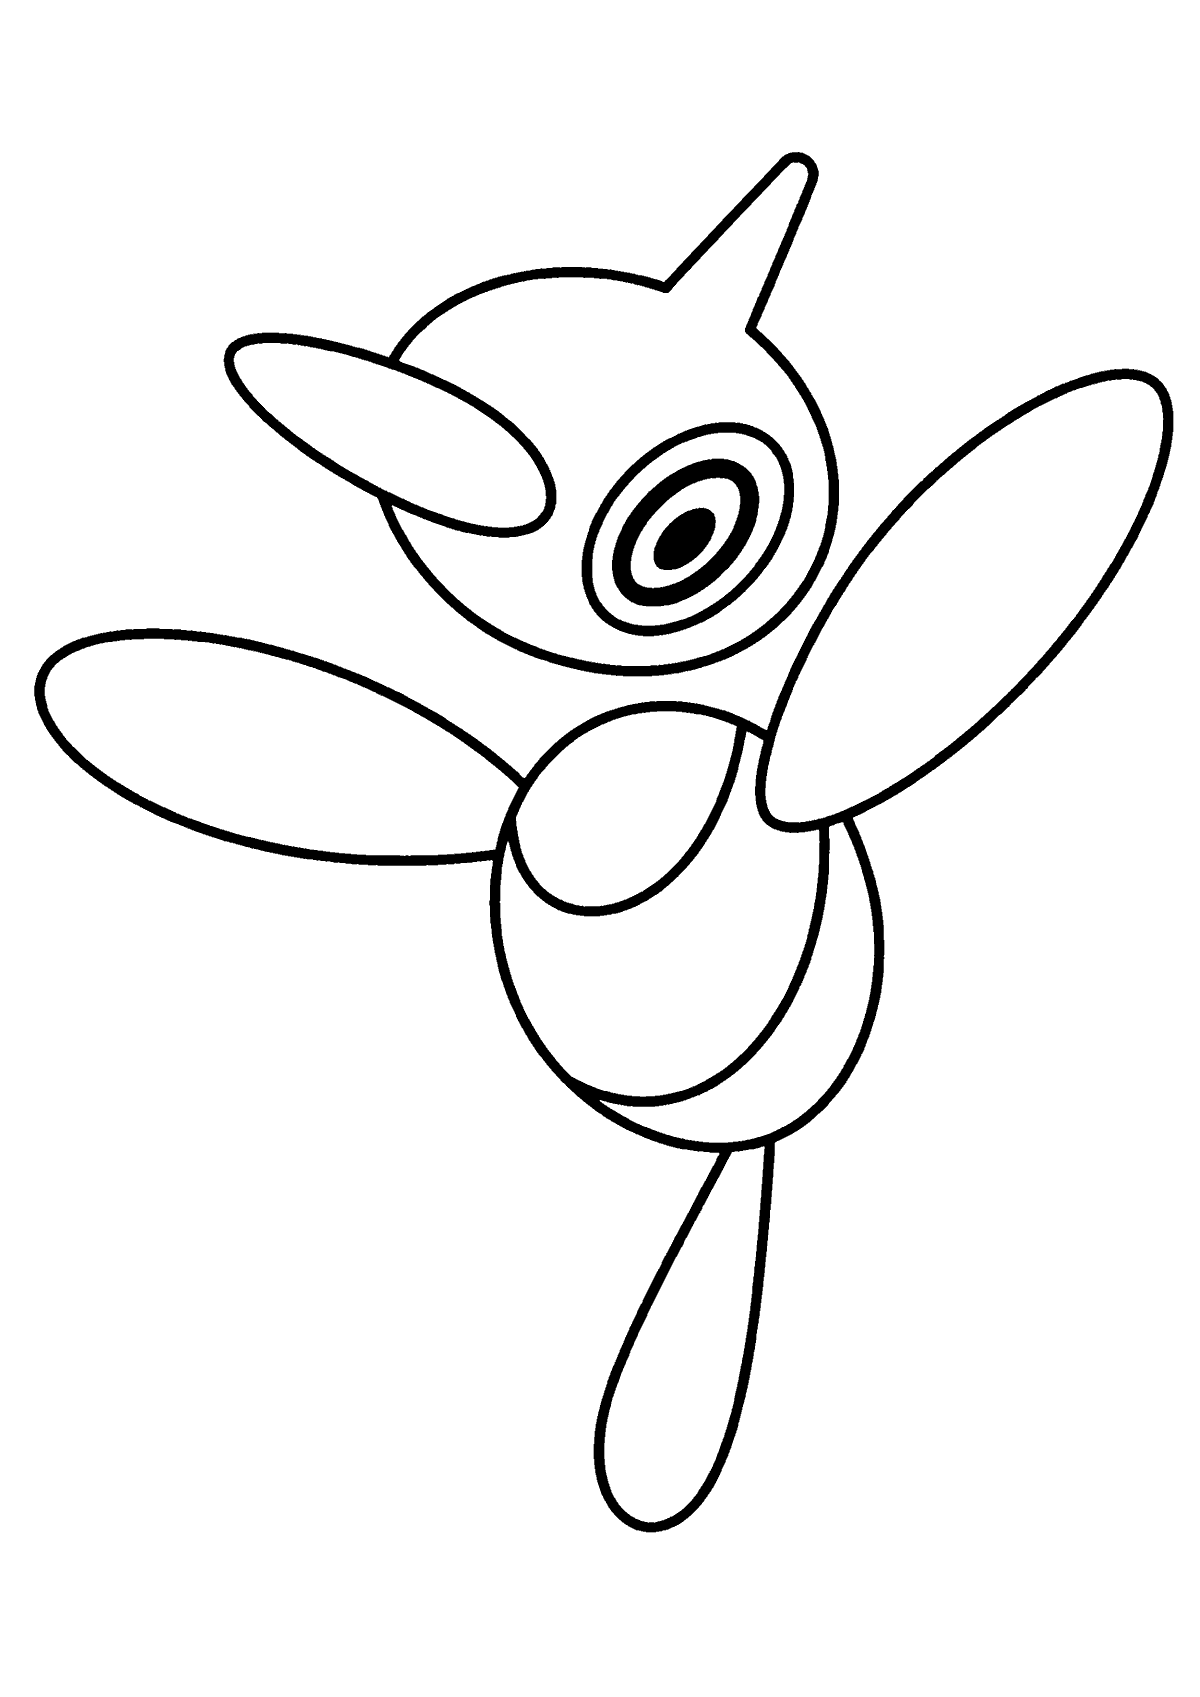 coloring page: A glitch Pokémon w/ only basic moves, created by a software error.